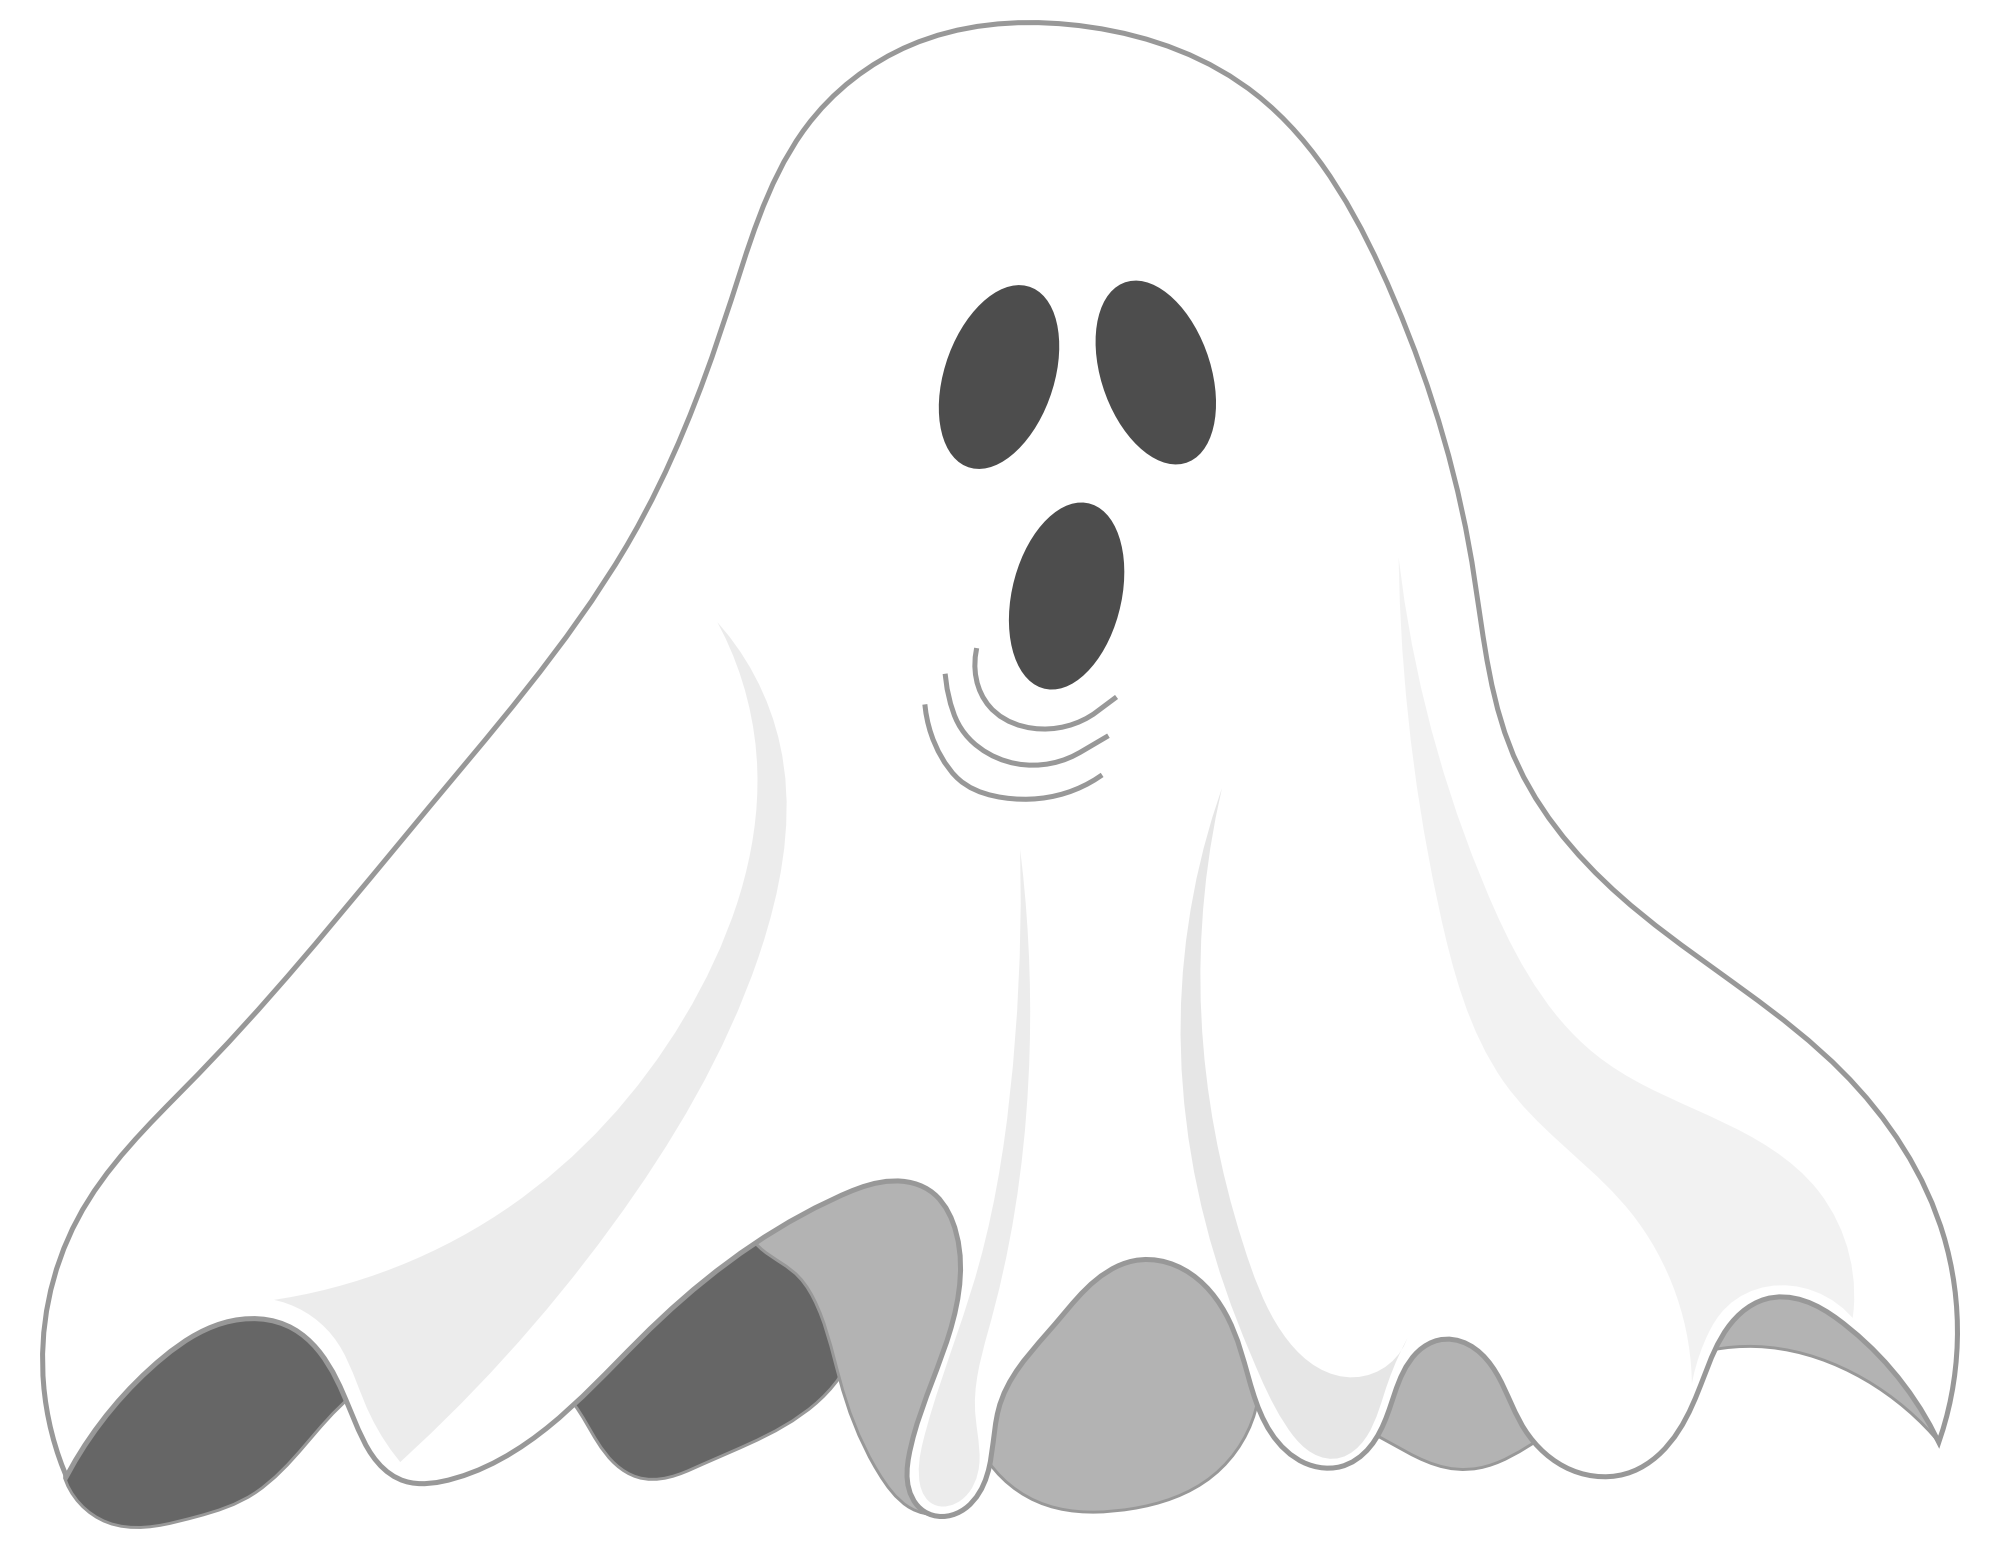 ghost clipart bhoot